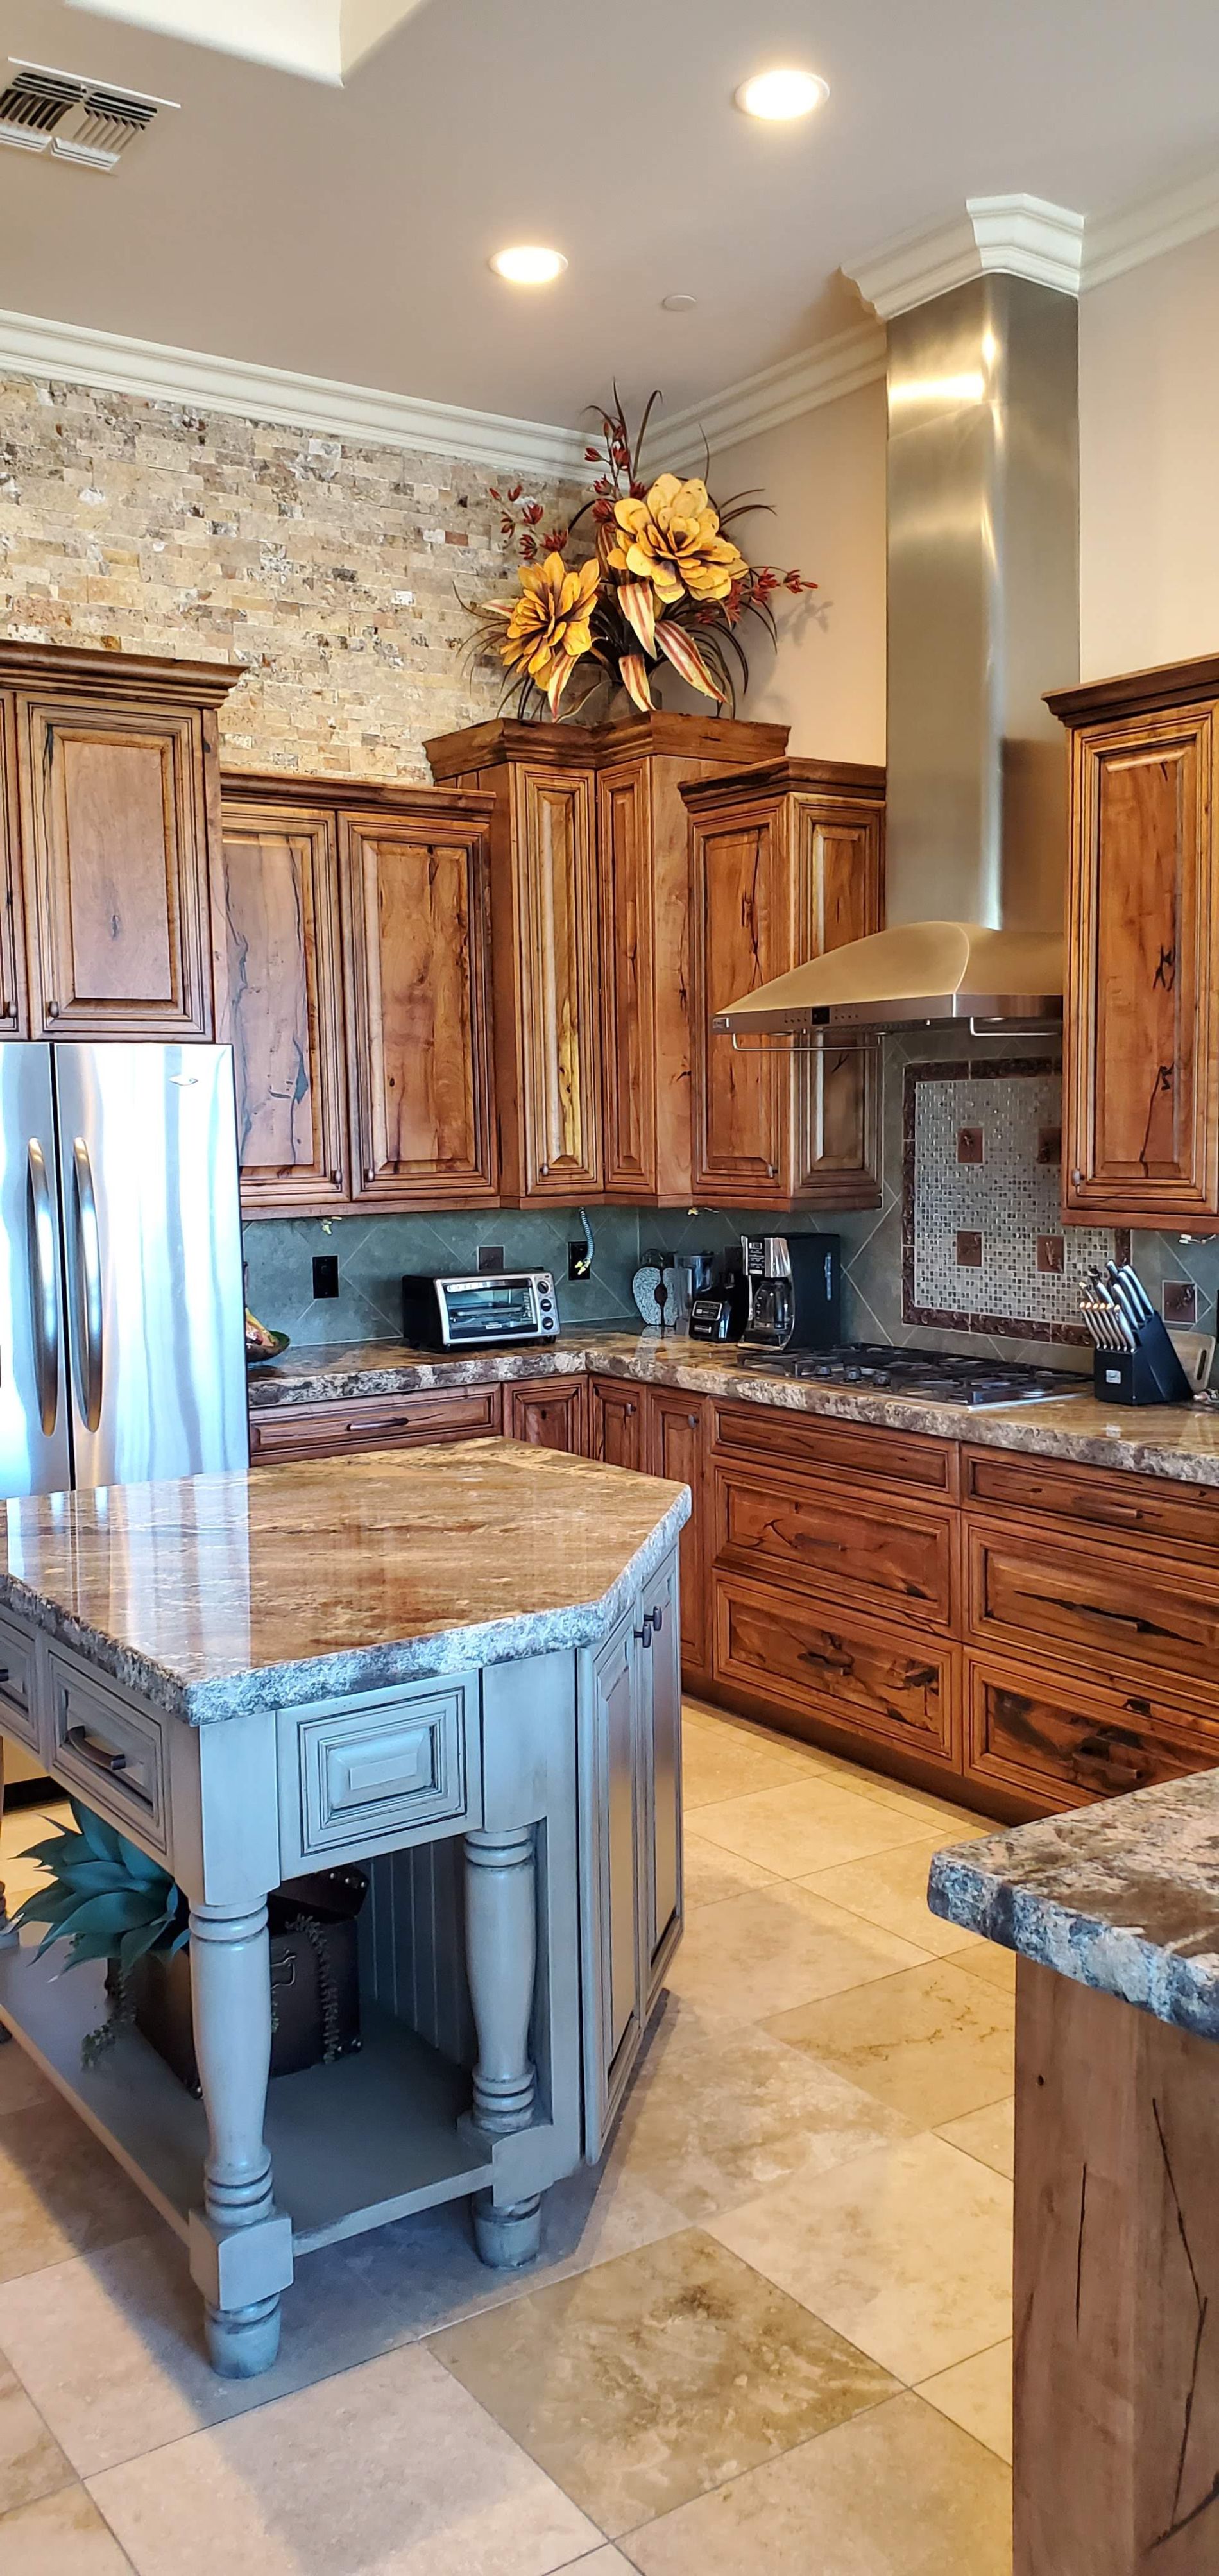 Kitchen with wood cabinets and marble counters